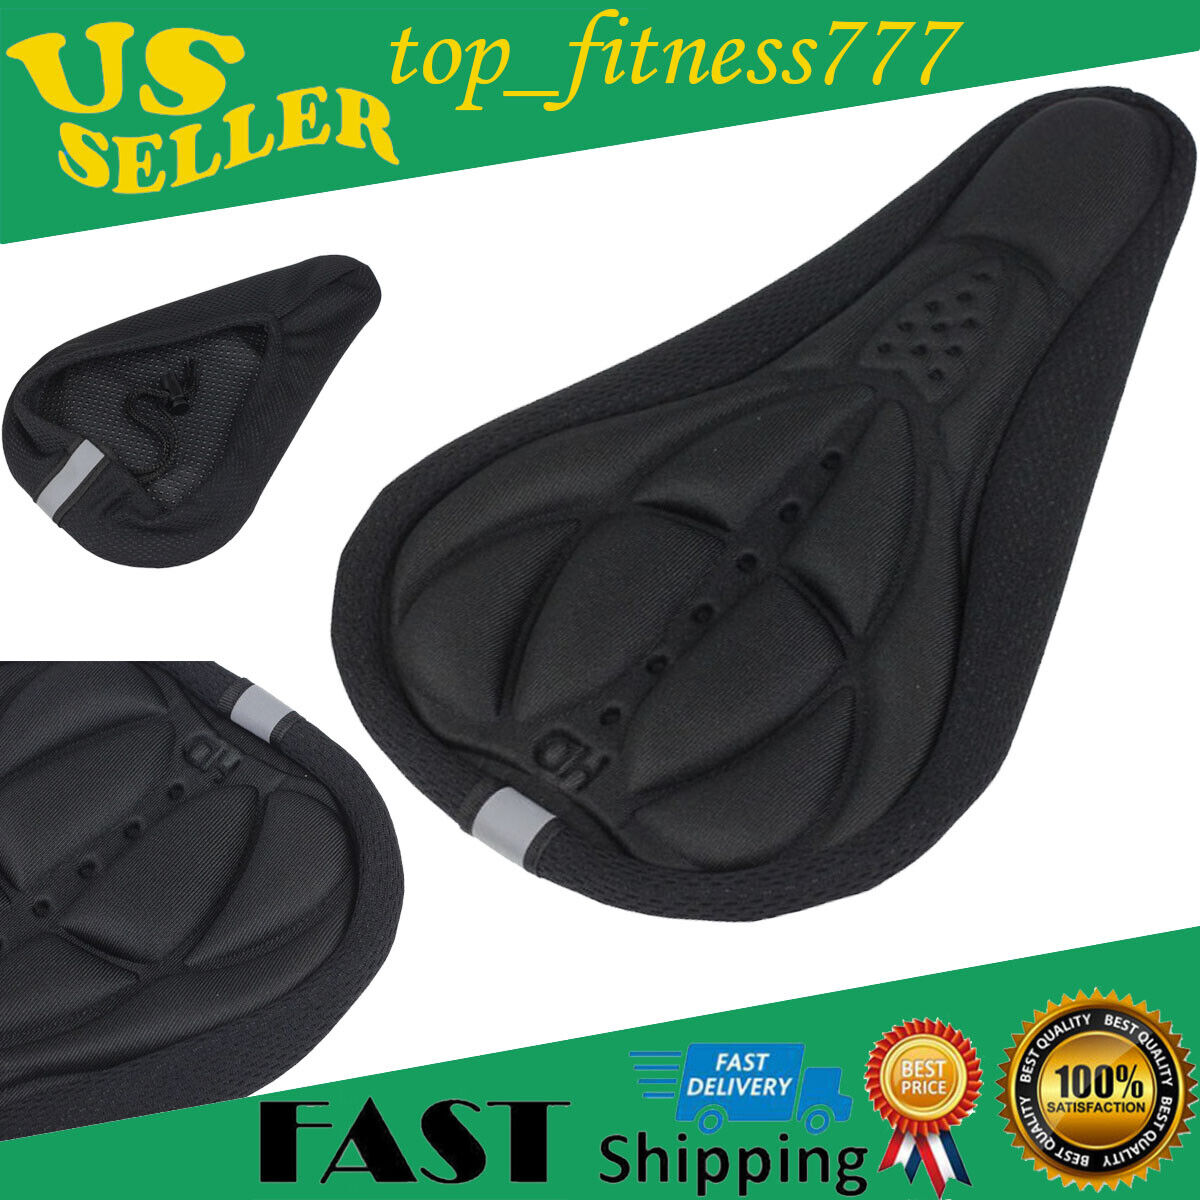 3D Bike Japan Maker New Gel Silicone Max 65% OFF Saddle Seat C Soft Padded Cover Comfort Pad